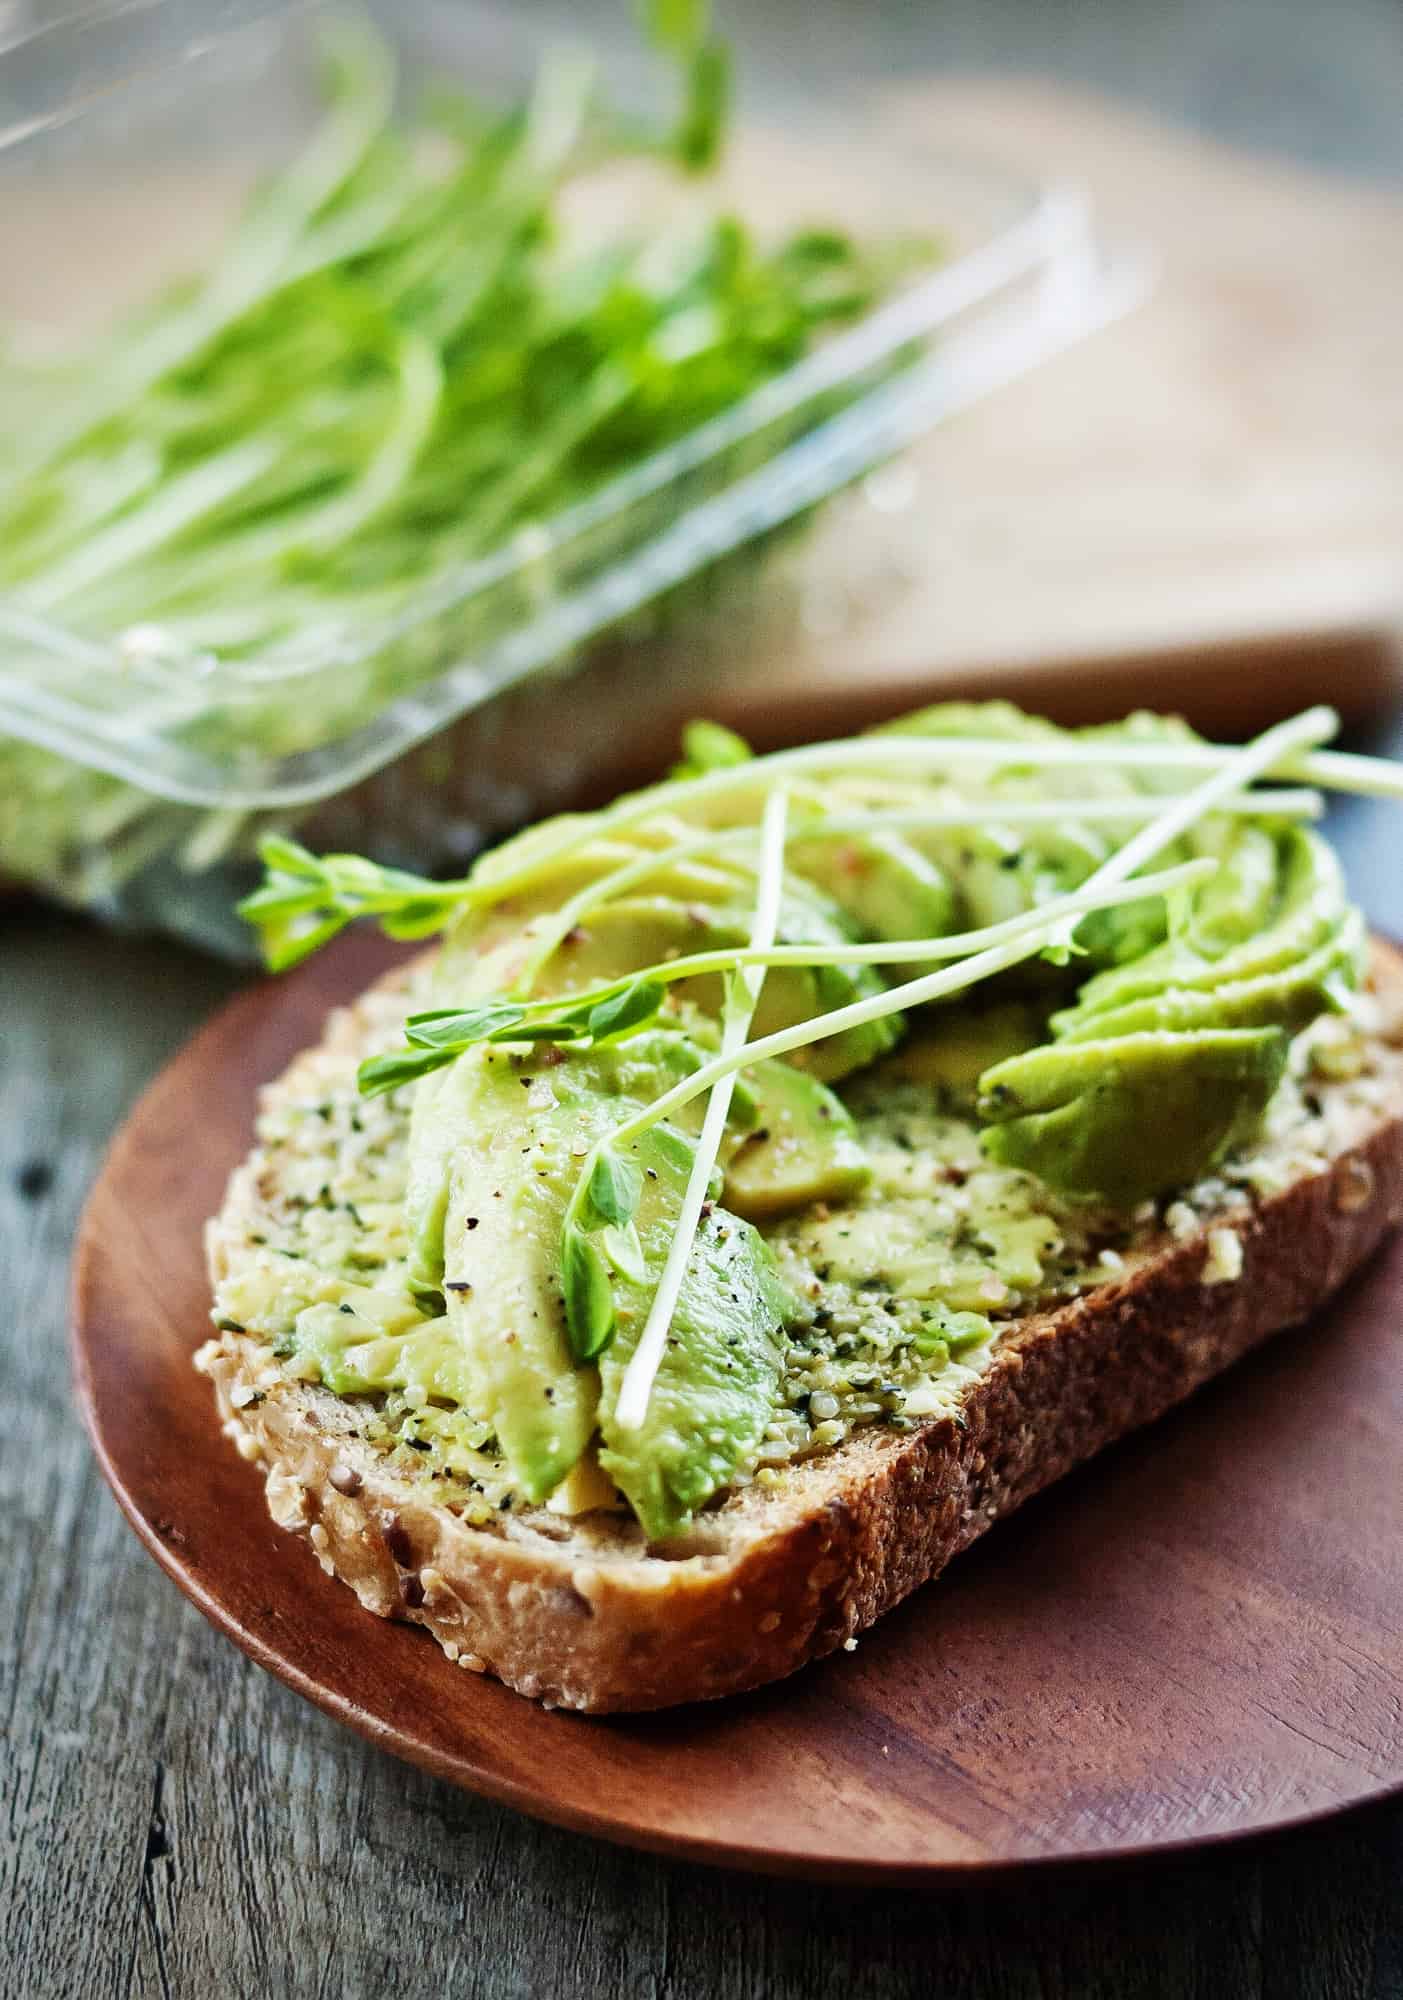 Avocado toast with hemp hearts. What does 100 grams of sugar a day look like? It's not what you think. With the new nutrition labelling rolling out, what do you navigate the new nutrition facts label and %DV?